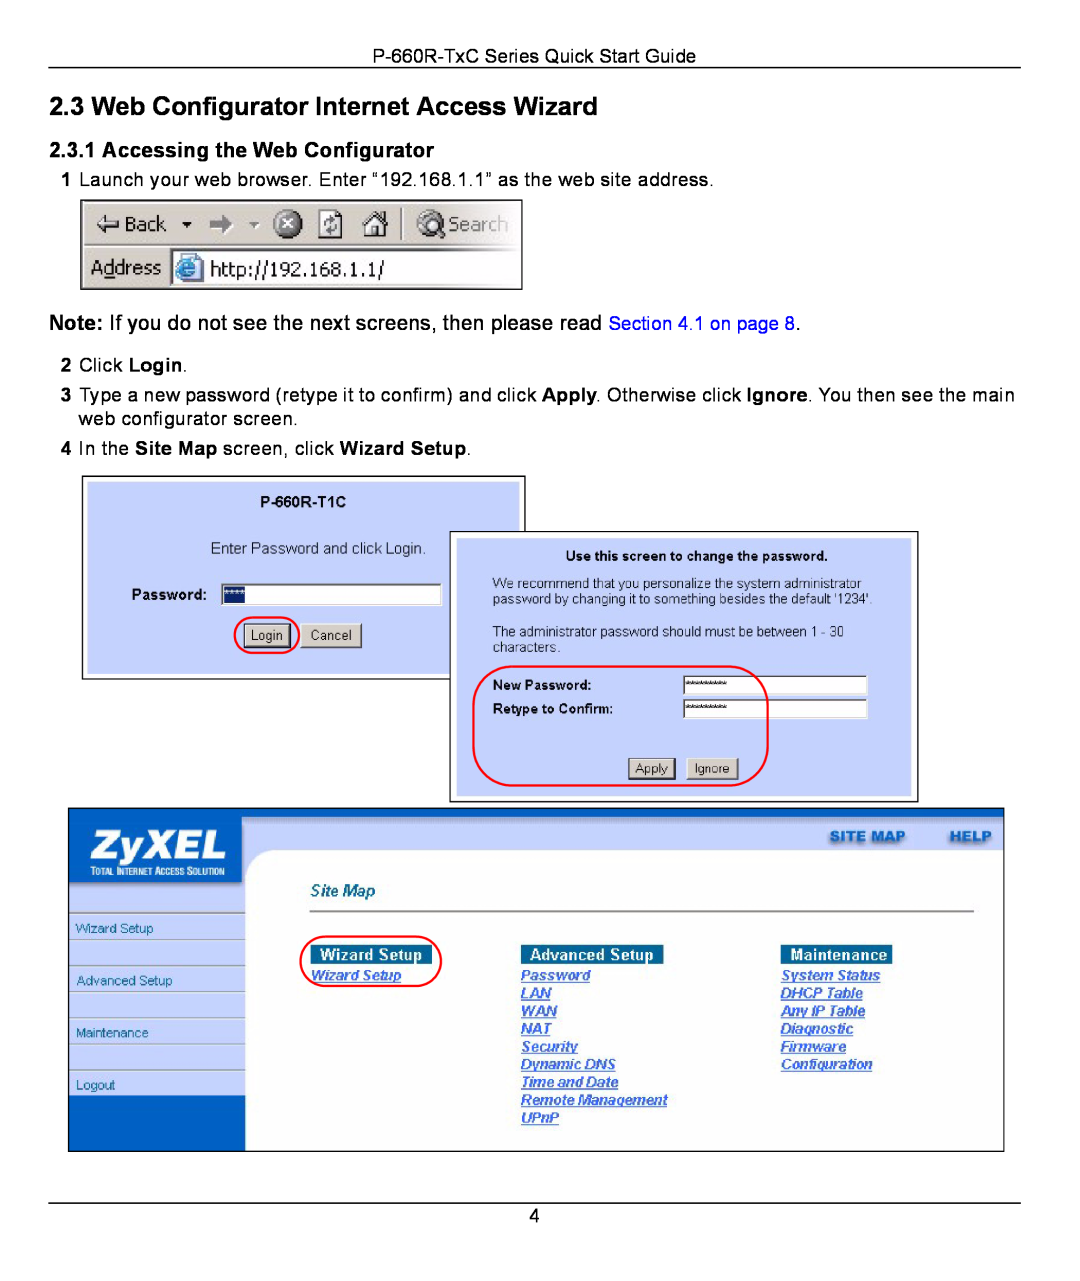 ZyXEL Communications P-660R-T1 v2 quick start Web Configurator Internet Access Wizard, Accessing the Web Configurator 